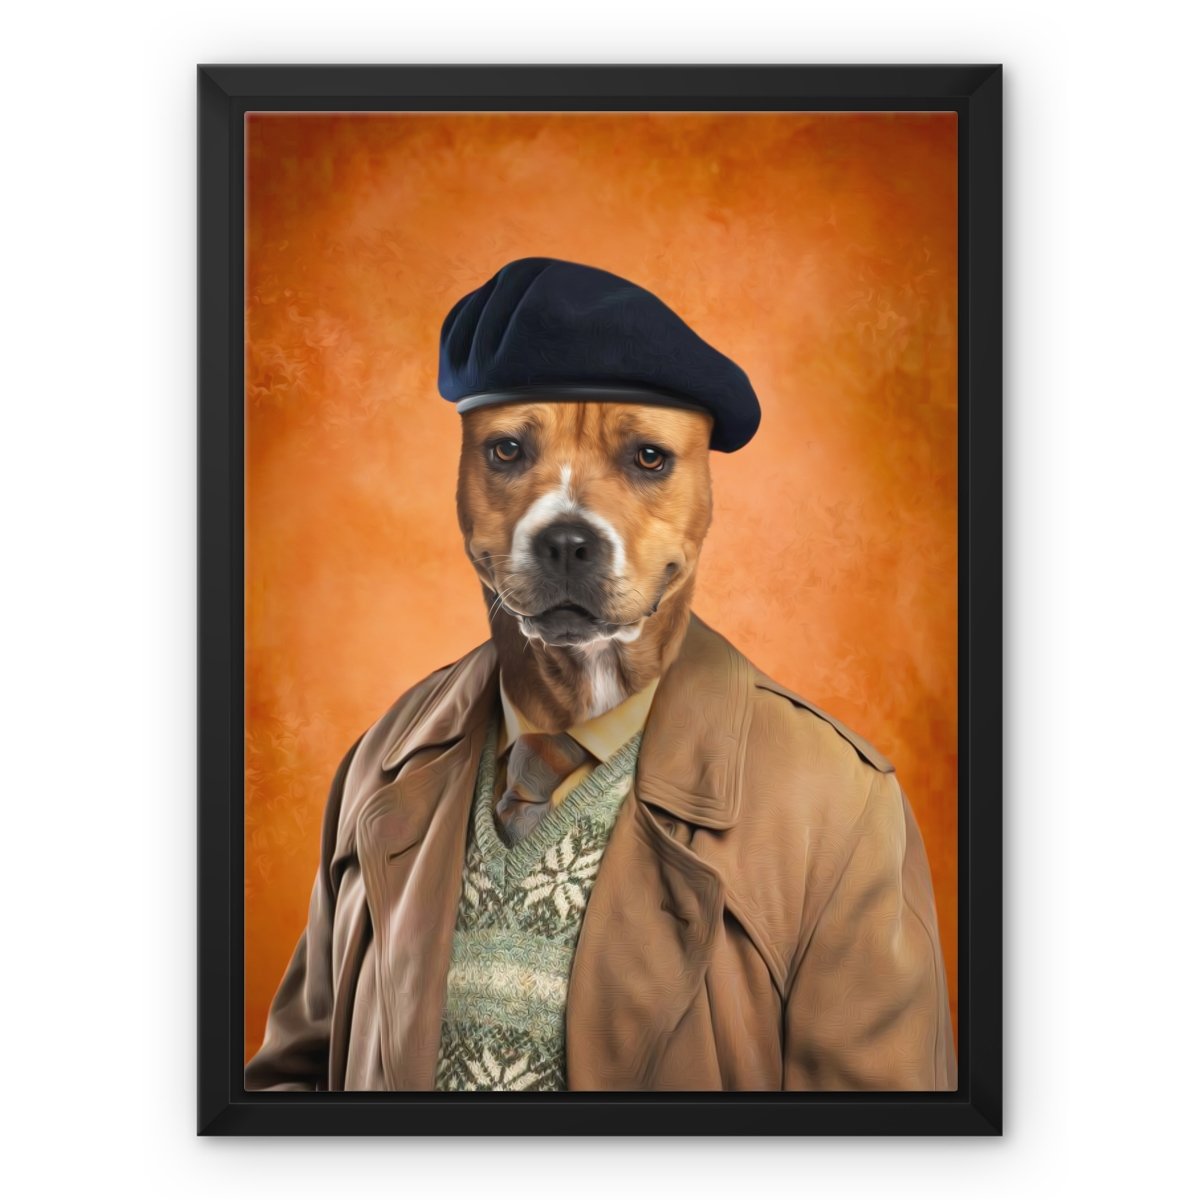 Frank Spencer: Custom Pet Canvas - Paw & Glory - #pet portraits# - #dog portraits# - #pet portraits uk#paw & glory, pet portraits canvas,my pet canvas blanket, pet on canvas reviews, personalized dog and owner canvas uk, pet canvas uk, pet canvas portrait, the pet on canvas